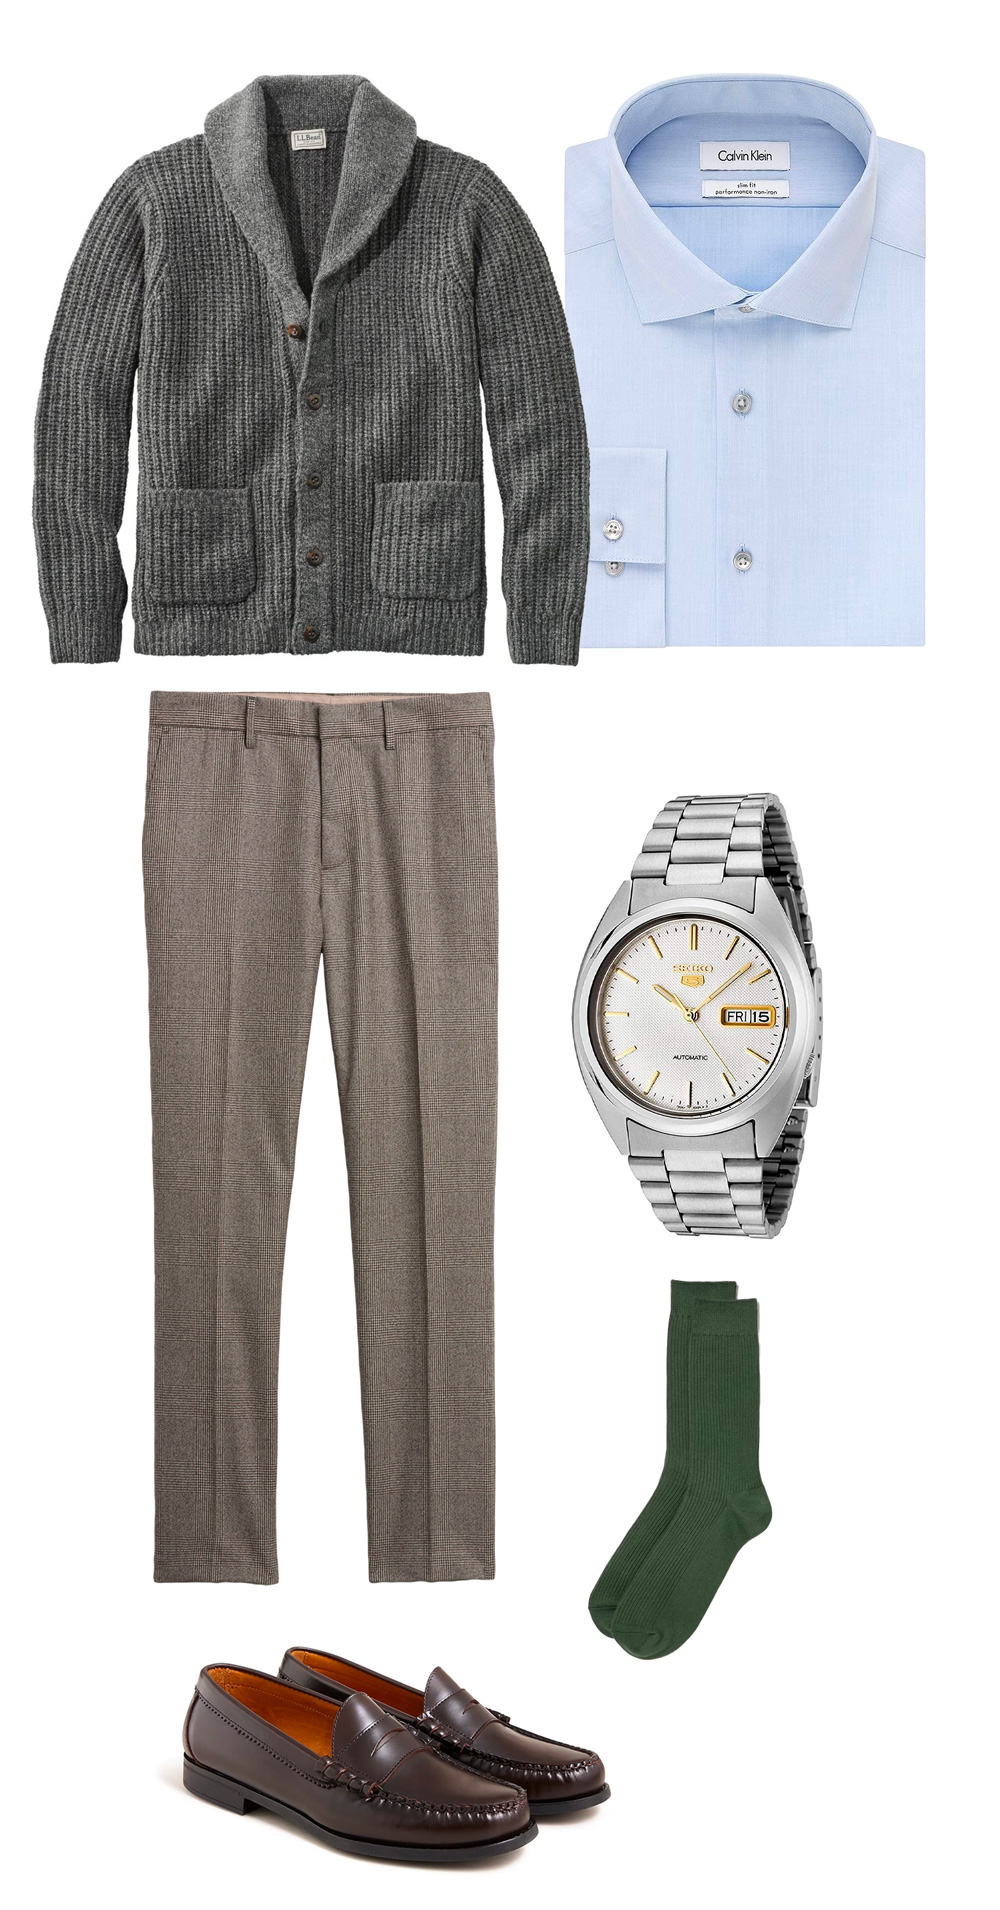 men's fall outfit - business casual featuring grey shawl collar cardigan, blue dress shirt, glen plaid tan trousers, a silver watch, green socks, and penny loafers